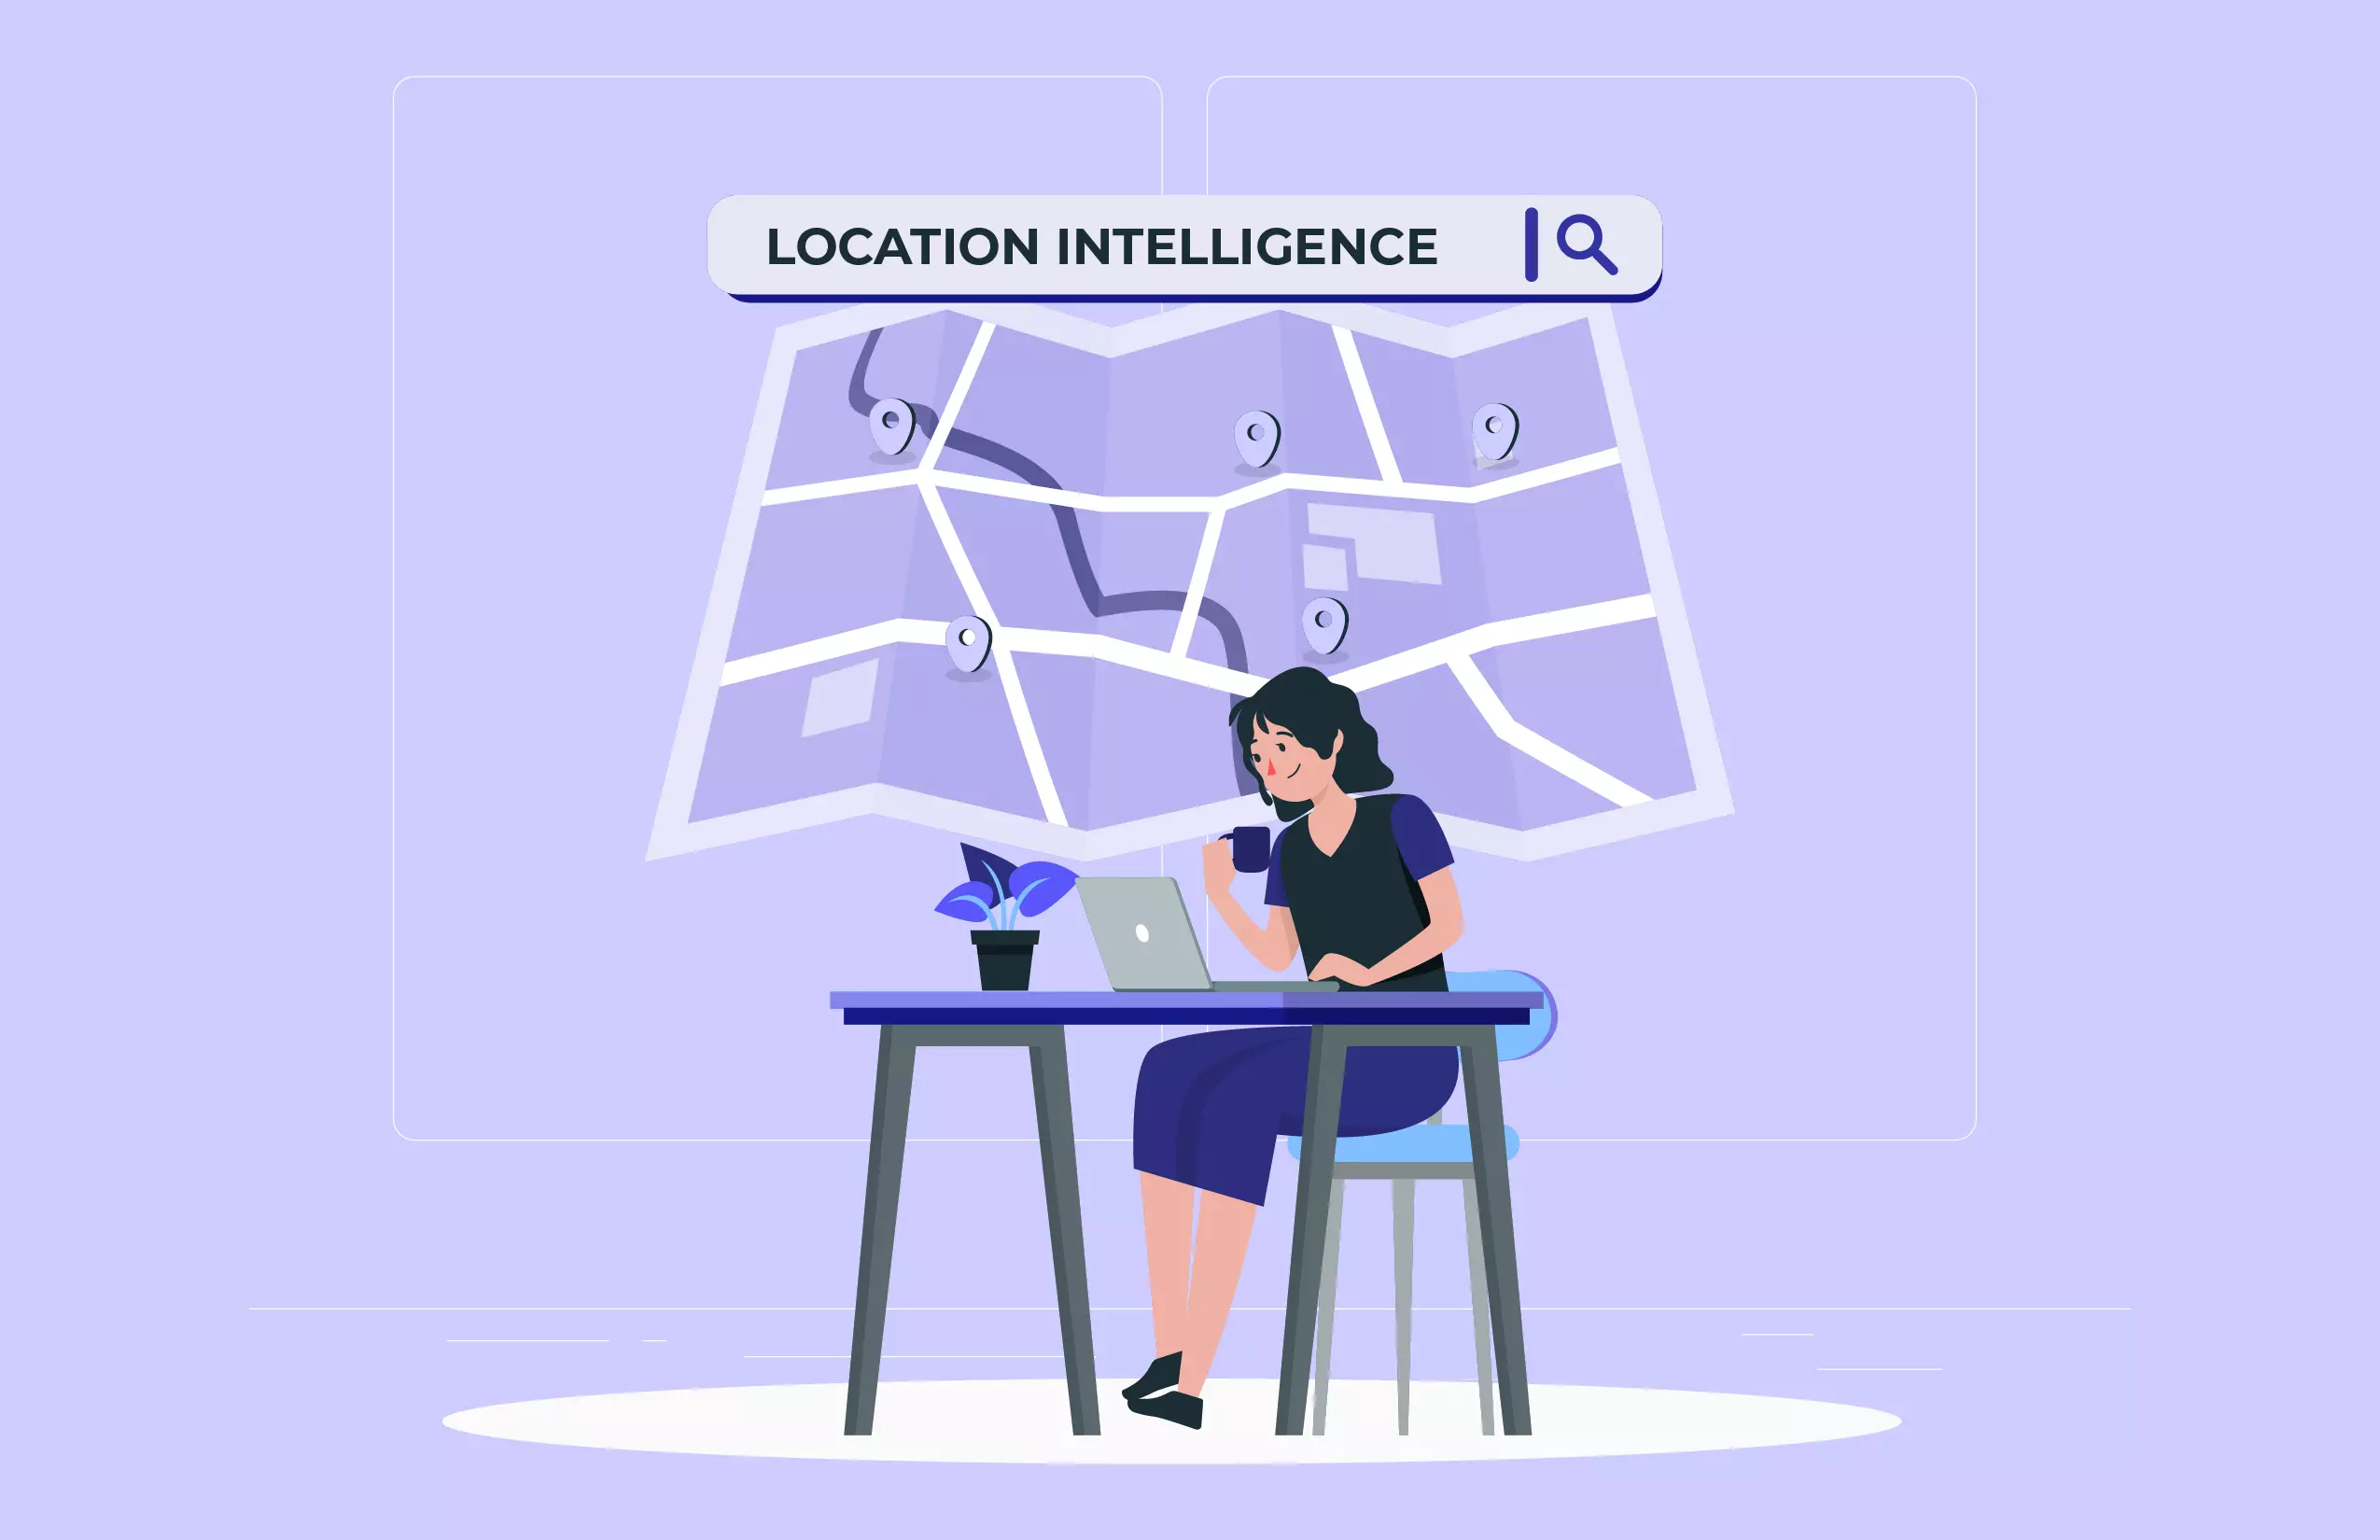 Location Intelligence: A Complete Guide On Location-Based Intelligence And Its Use Cases